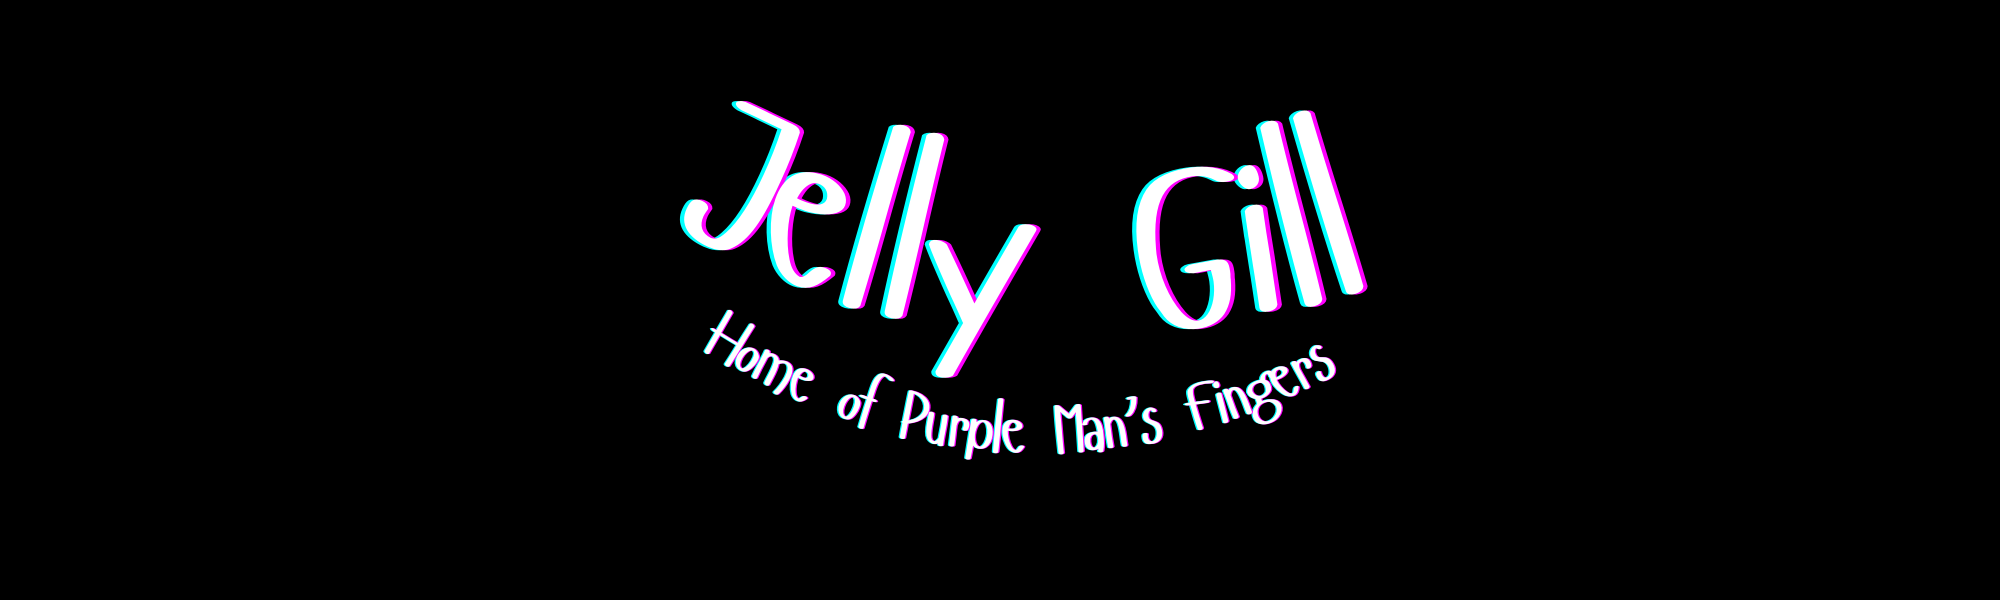 Jelly Gill: Home of Purple Man's Fingers